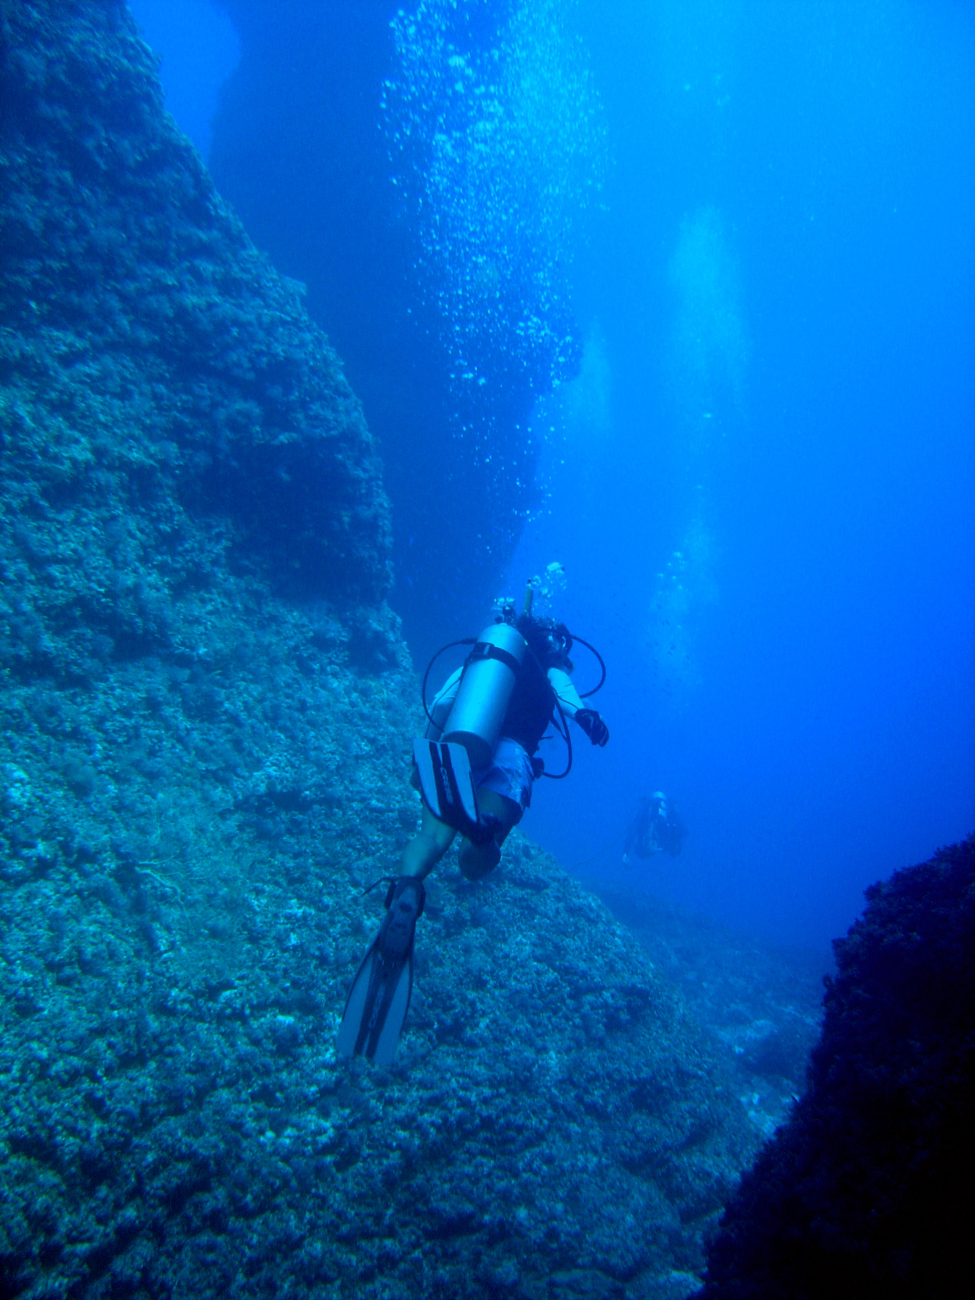 Diving along coral pinnacle structures